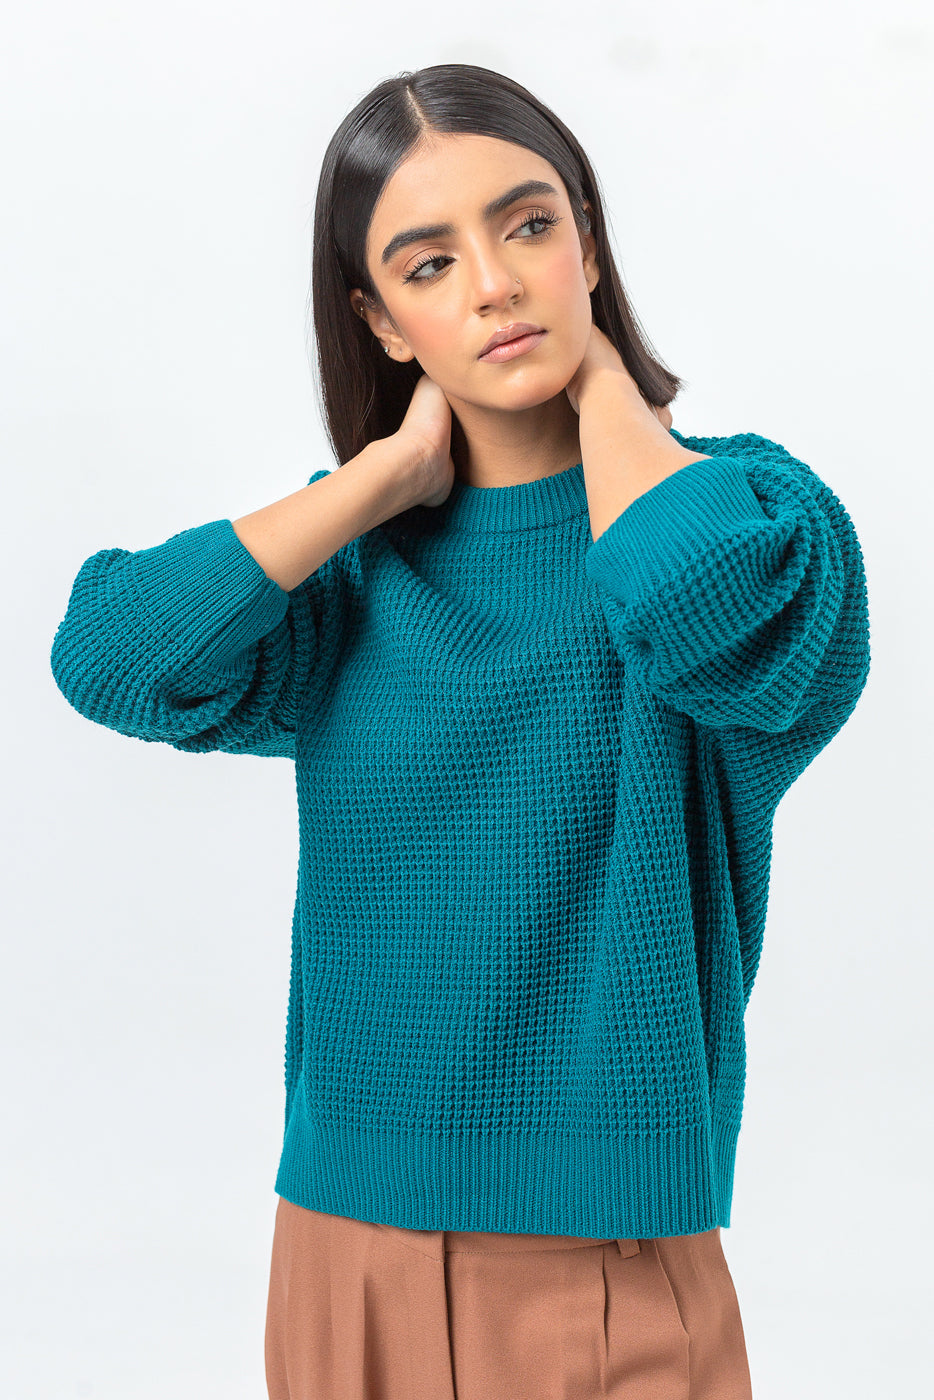 Teal Pullover Sweater - BEECHTREE